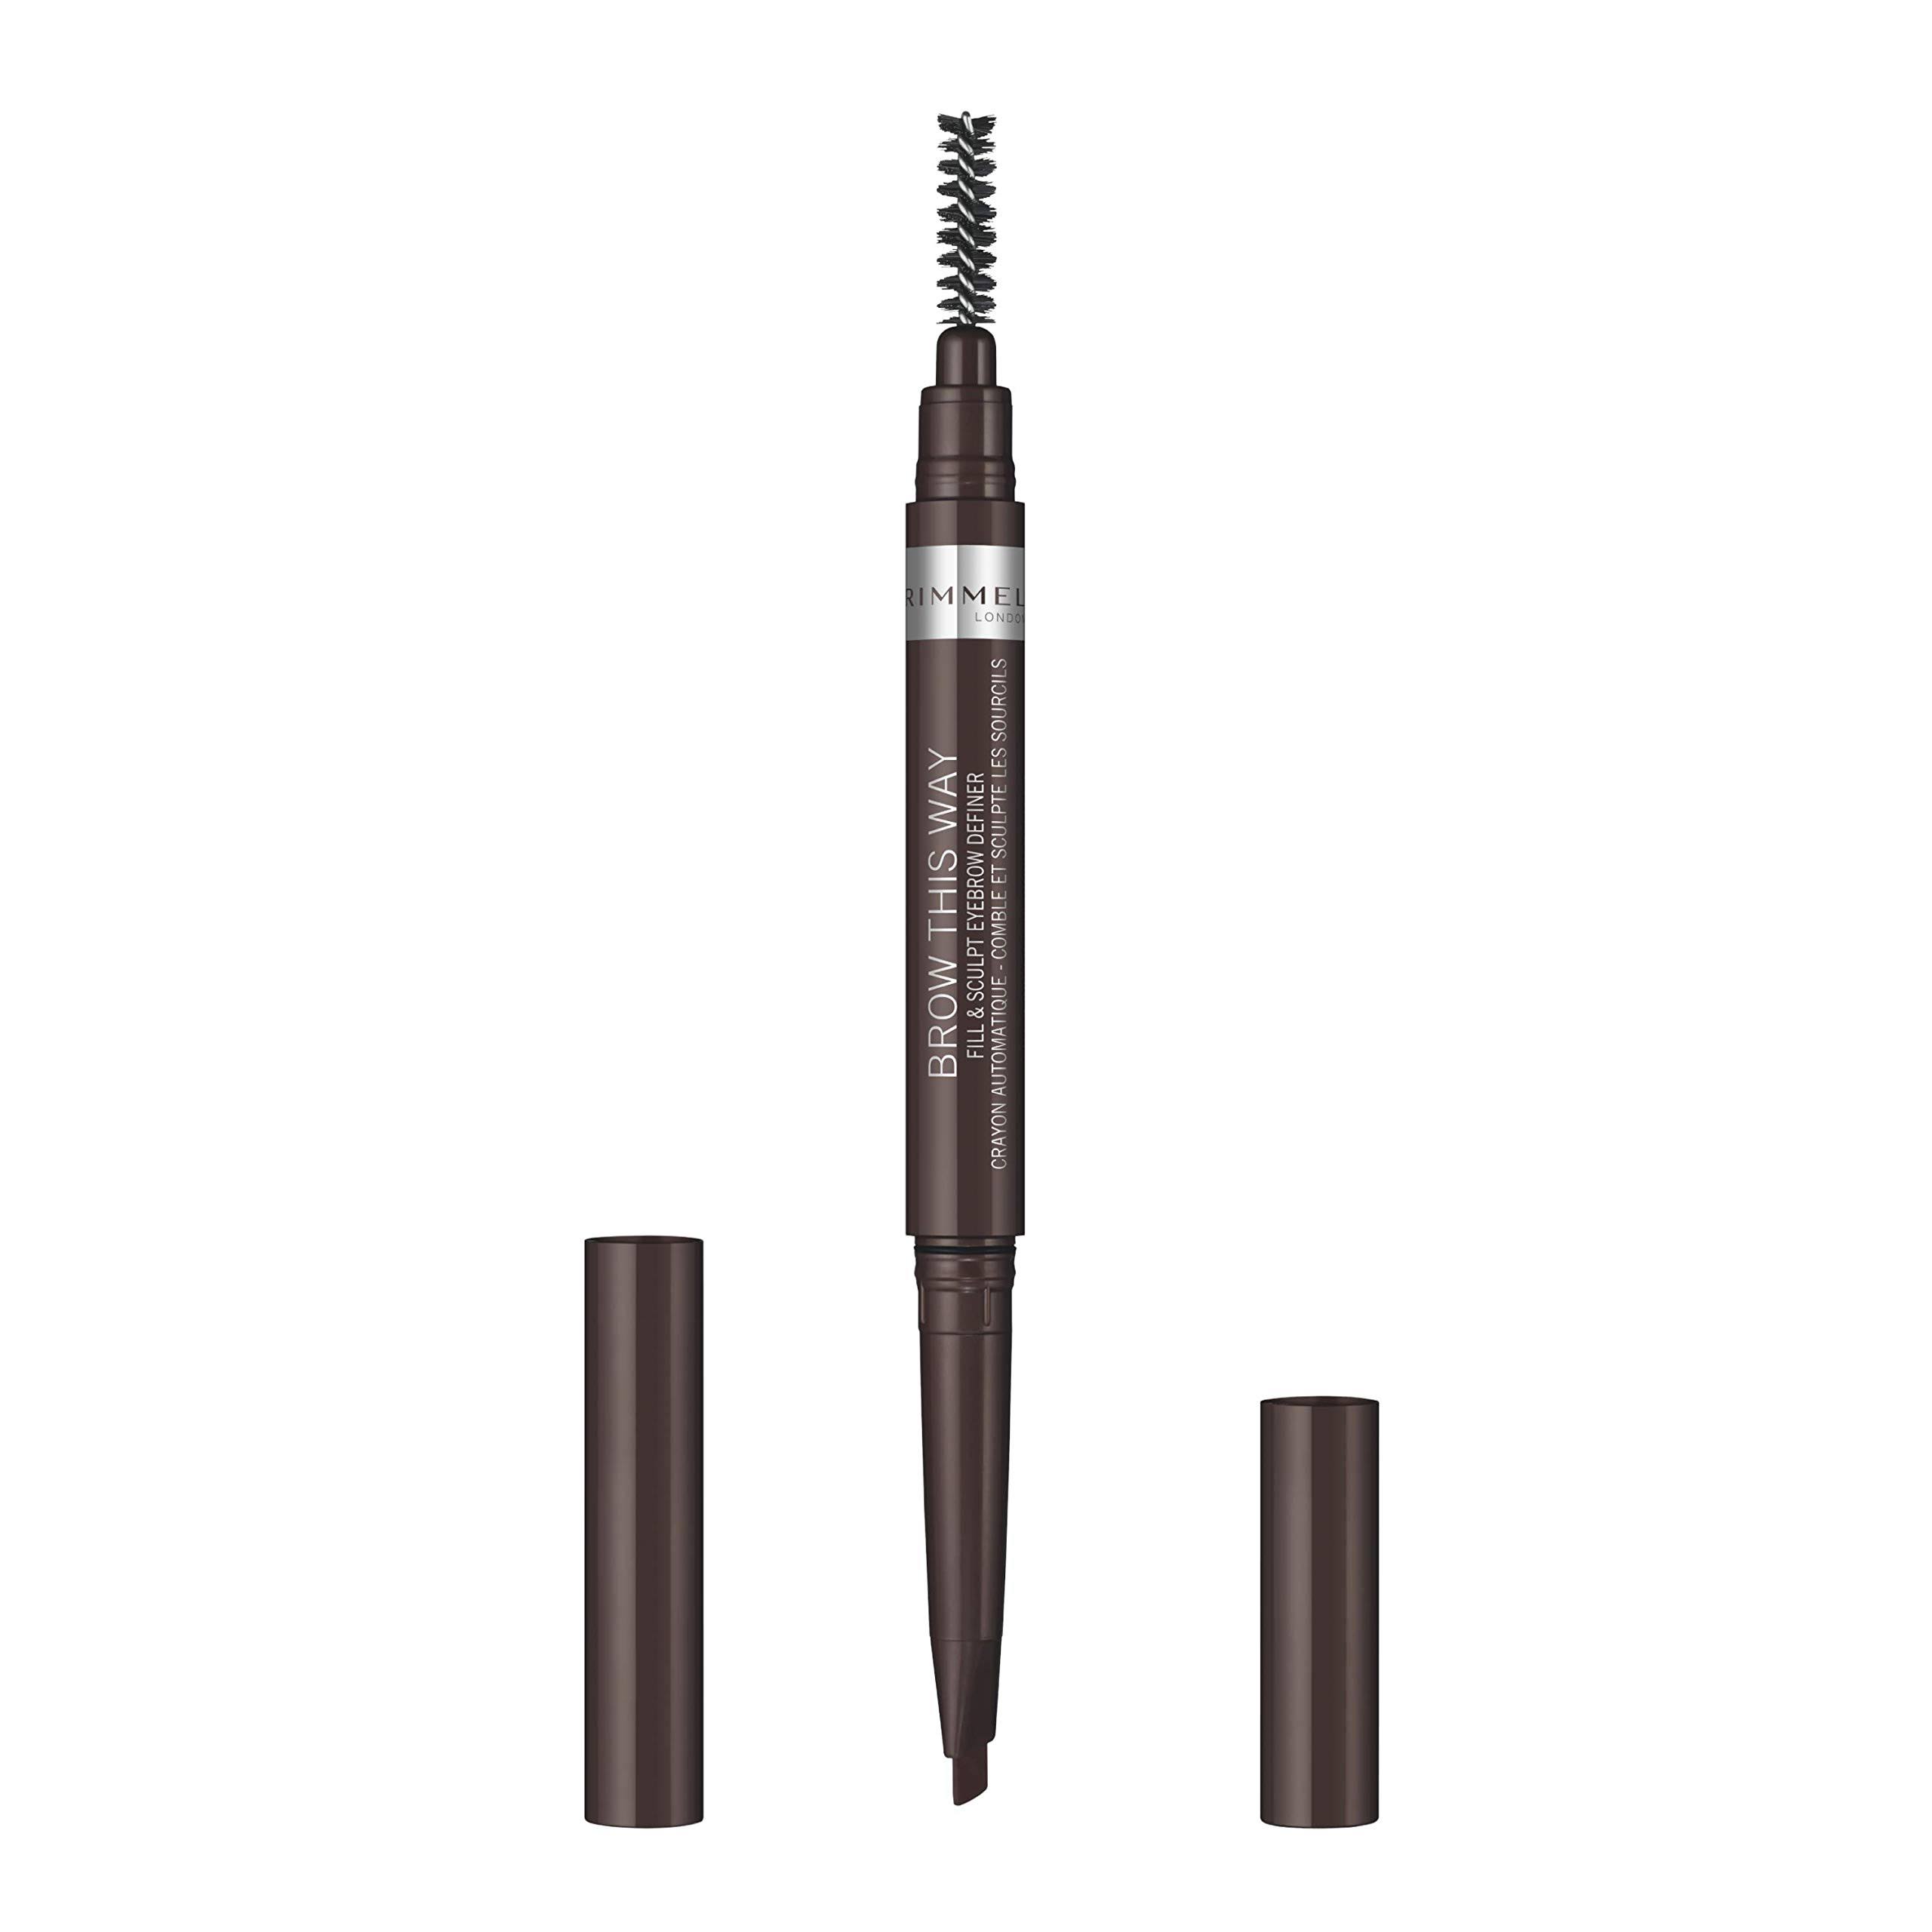 Rimmel Brow This Way Fill and Sculpt Eyebrow Definer - 003 Dark Brown, 0.25g